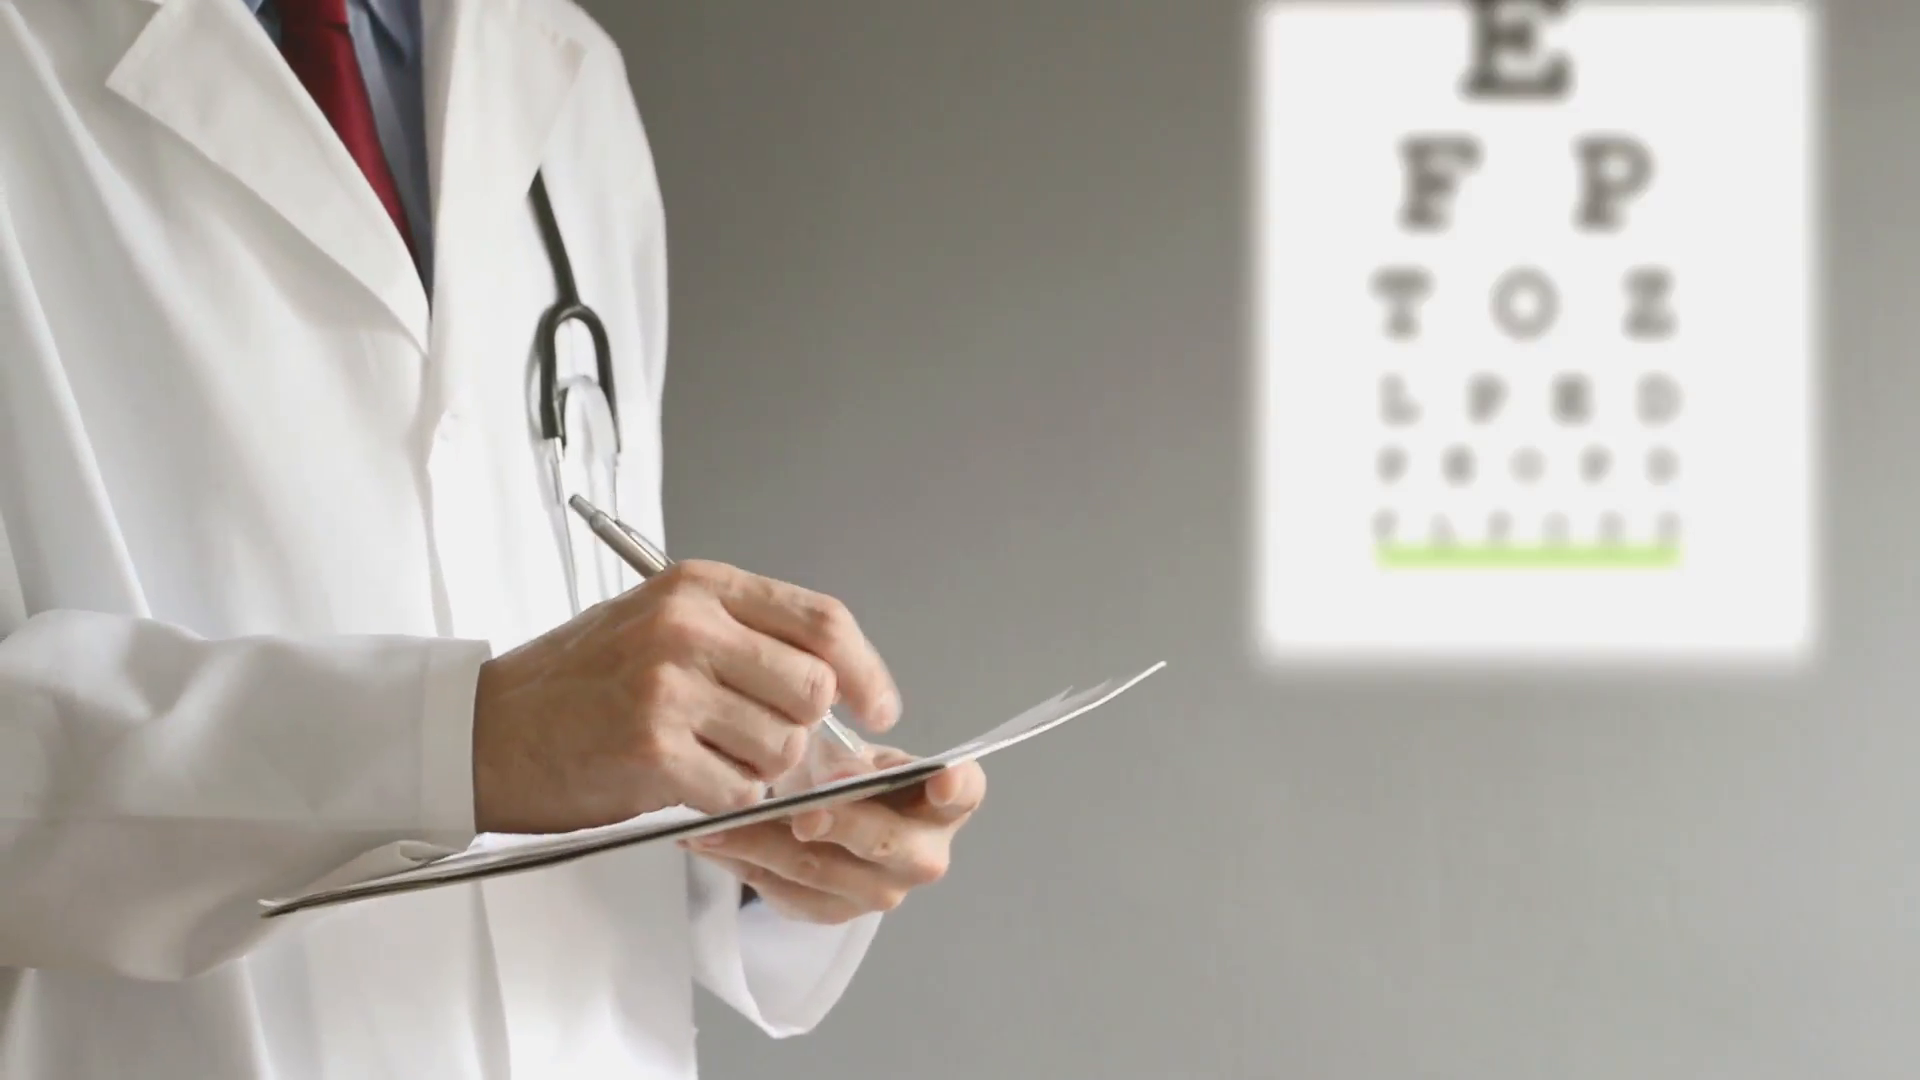 male-ophthalmologist-doctor-writing-prescription-to-patient-after-eye-examination-1920x1080-1080p-hd-format_qjb7sowo8__F0000